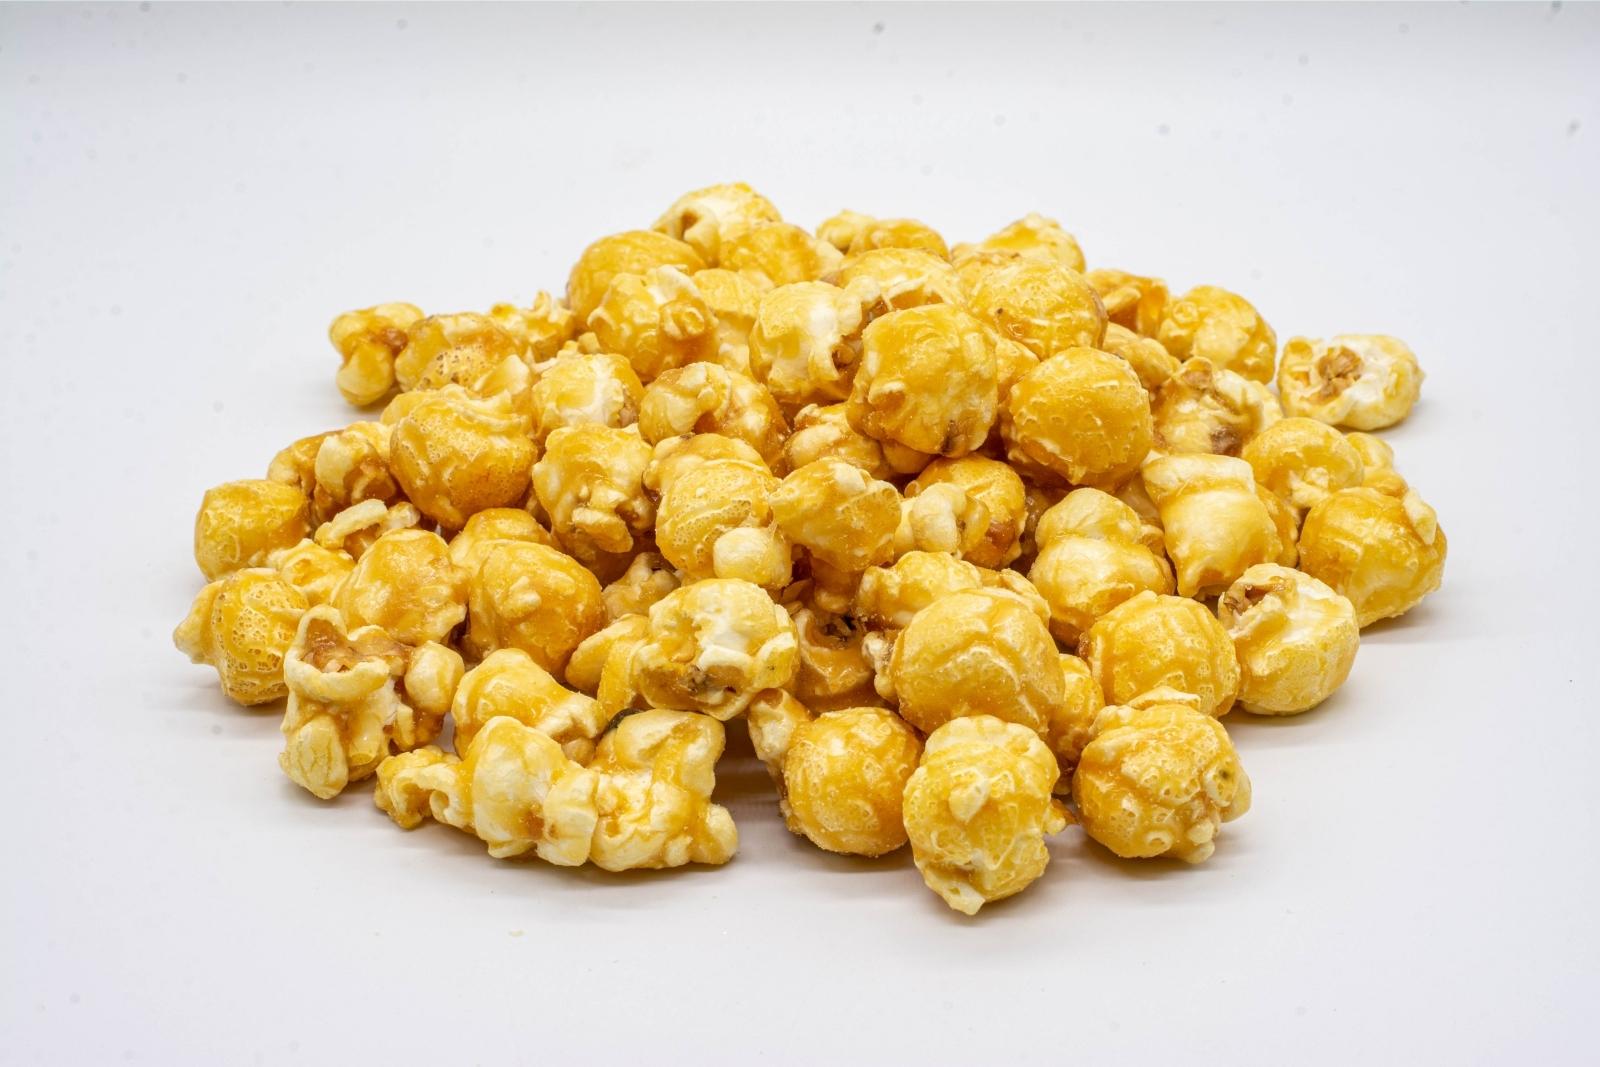 A pile of loose 1:1 Caramel Popcorn, made by XITE, on a white background